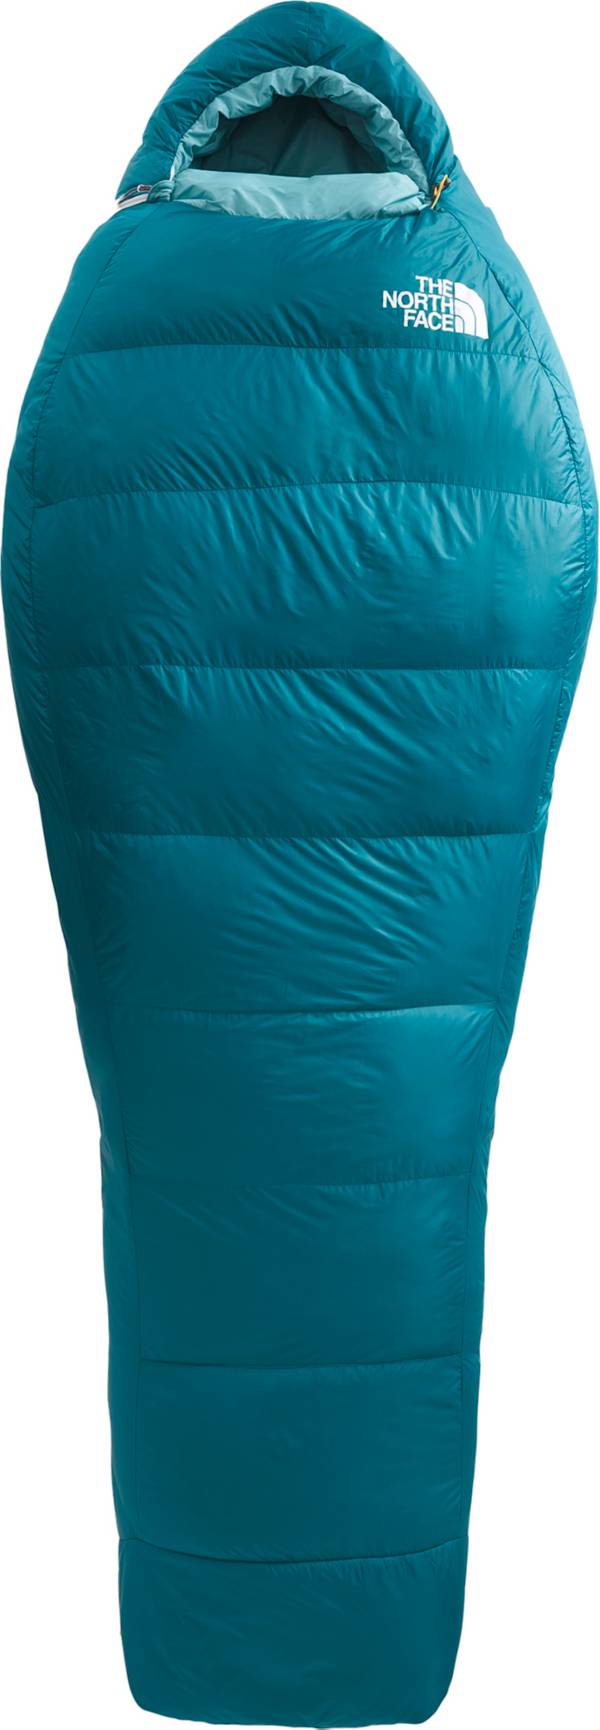 The North Face Trail Lite Down 20 Sleeping Bag product image